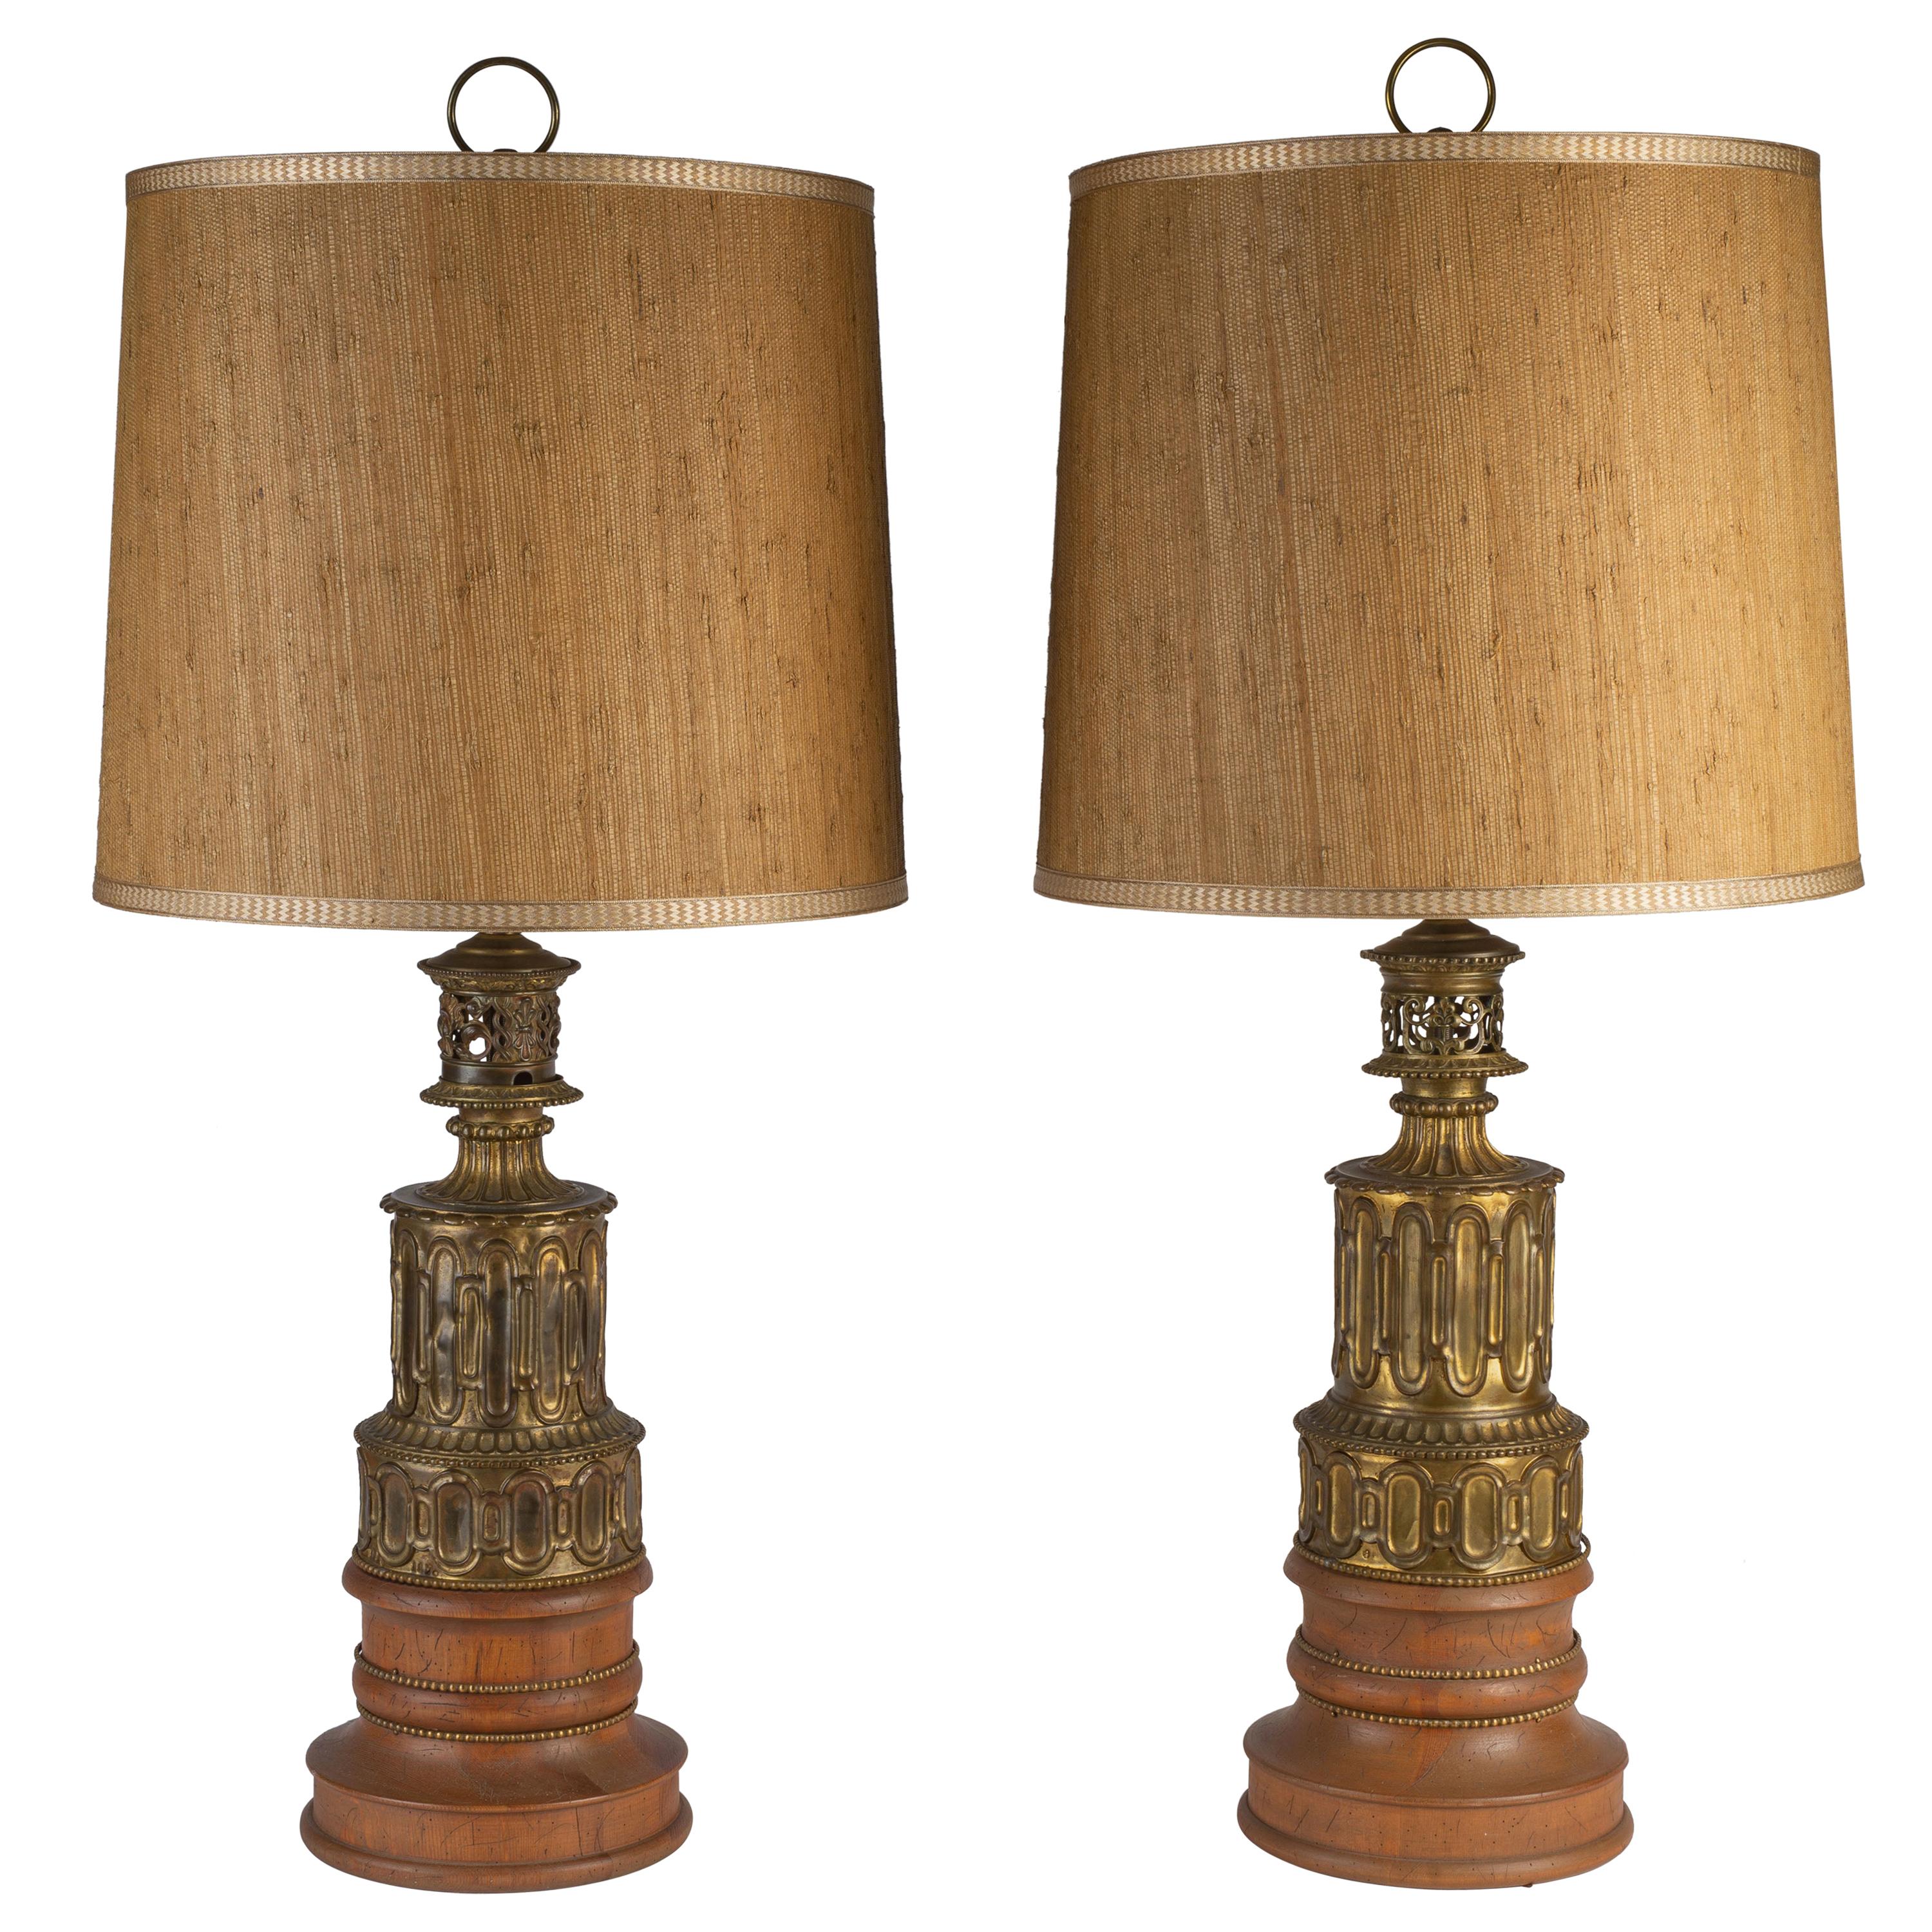 Pair of French Gothic Revival Wood and Brass Oil Lamps